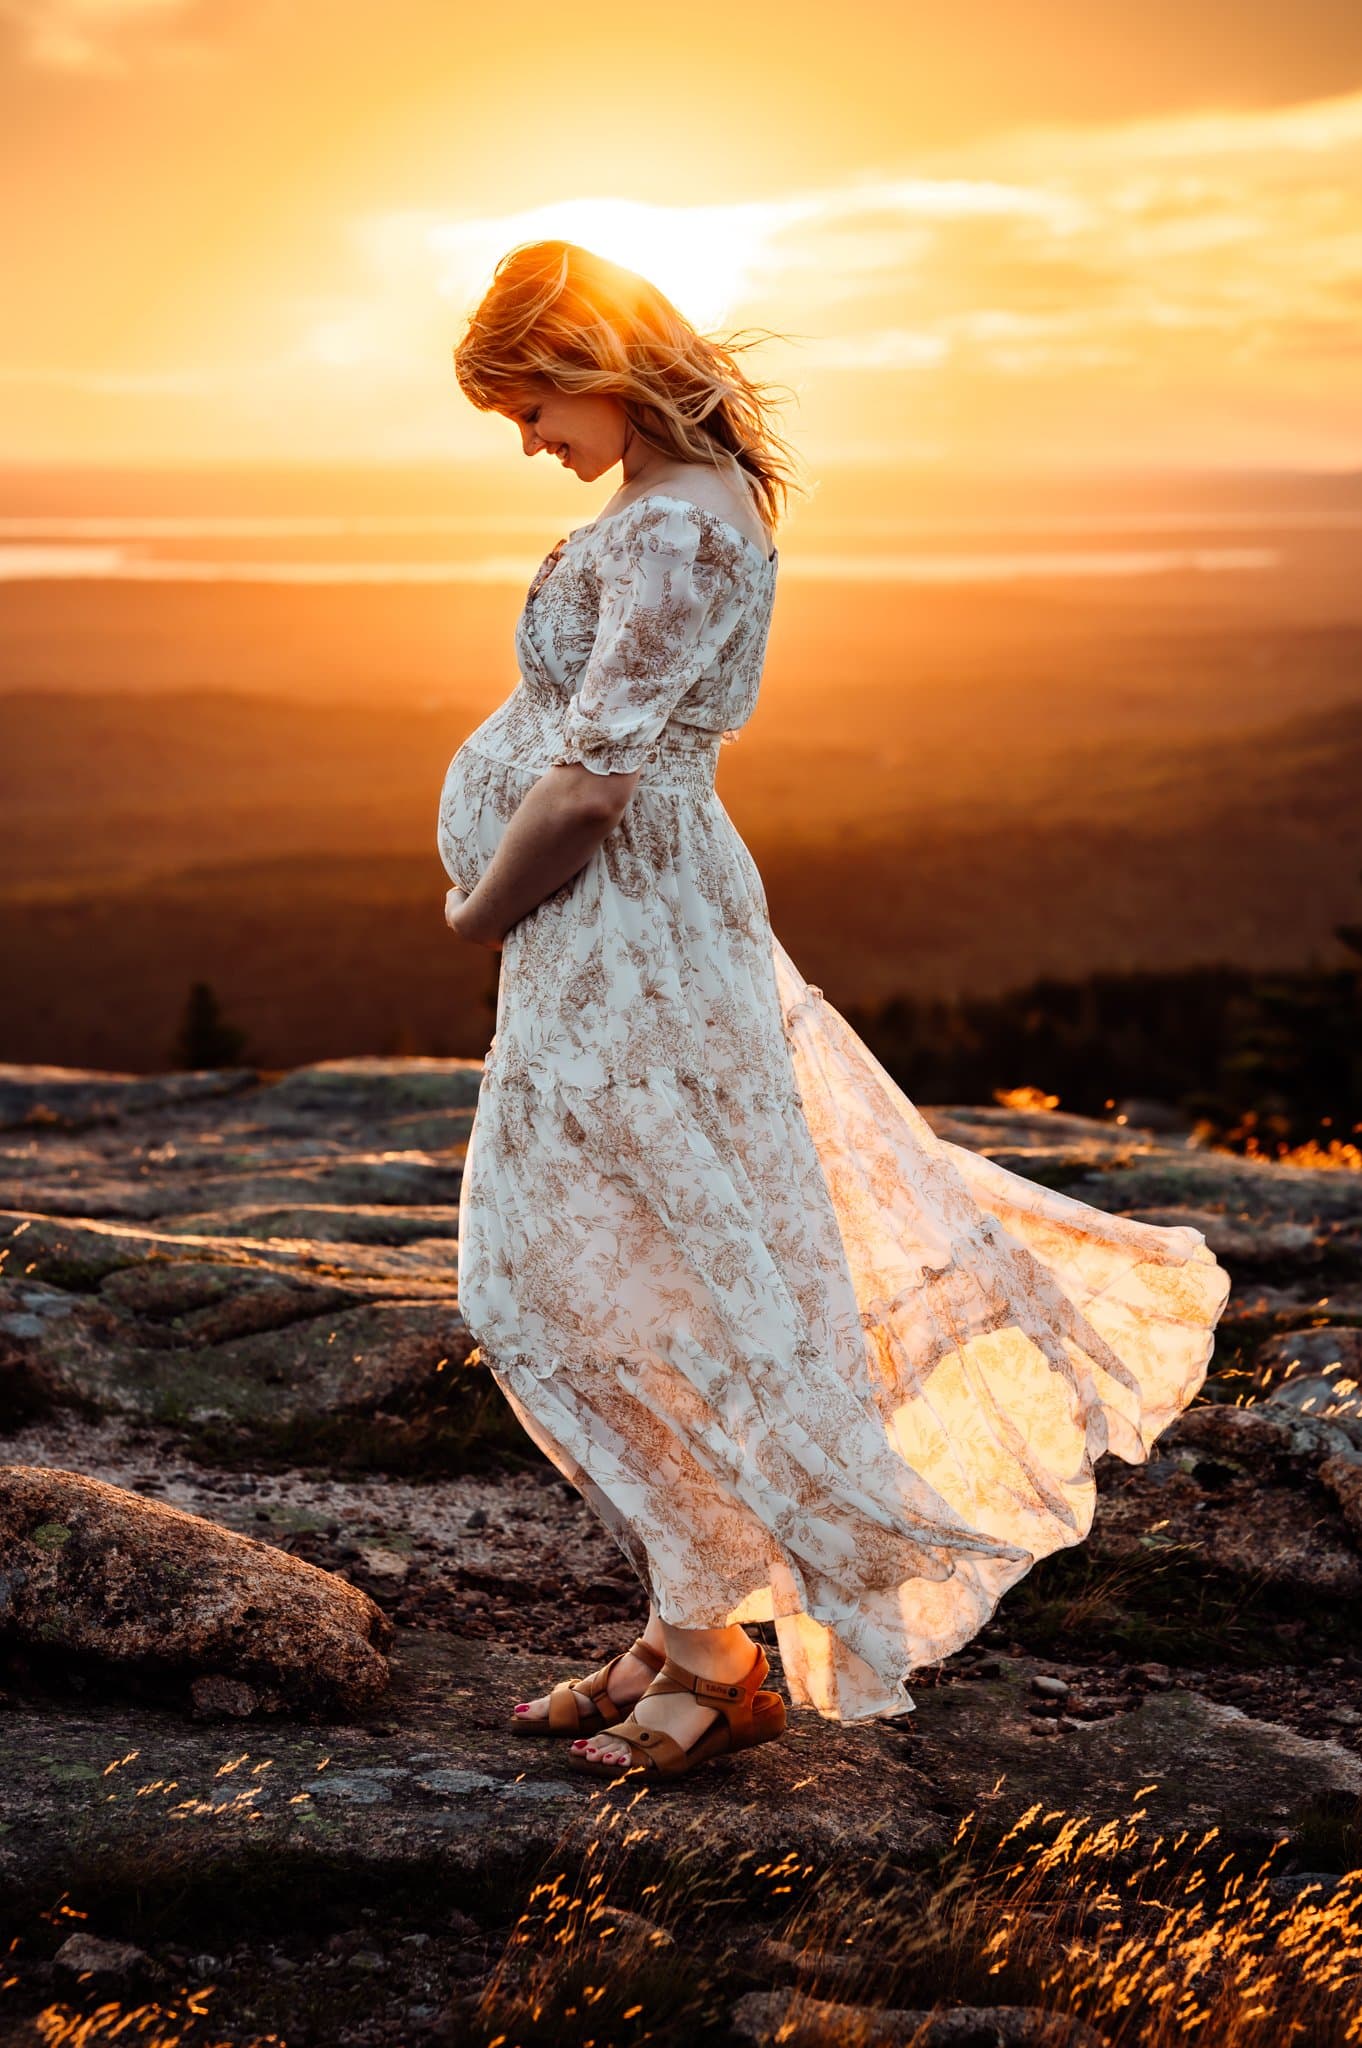 Pregnant woman standing in front of mountain sunset wearing a white dress